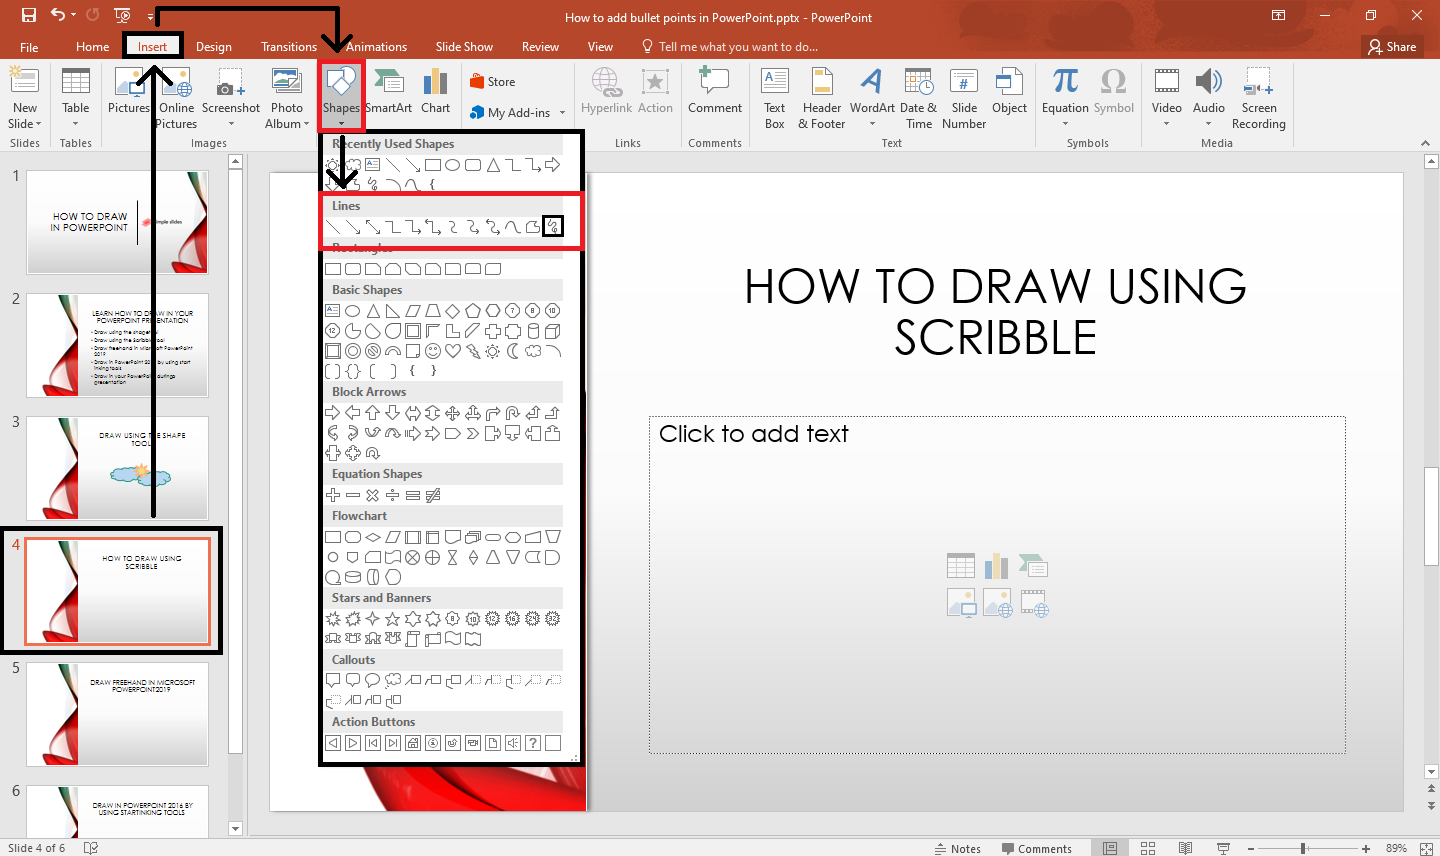 Go to insert and click Shapes. In the drop-down menu, navigate Lines and click "Scribble" tool.